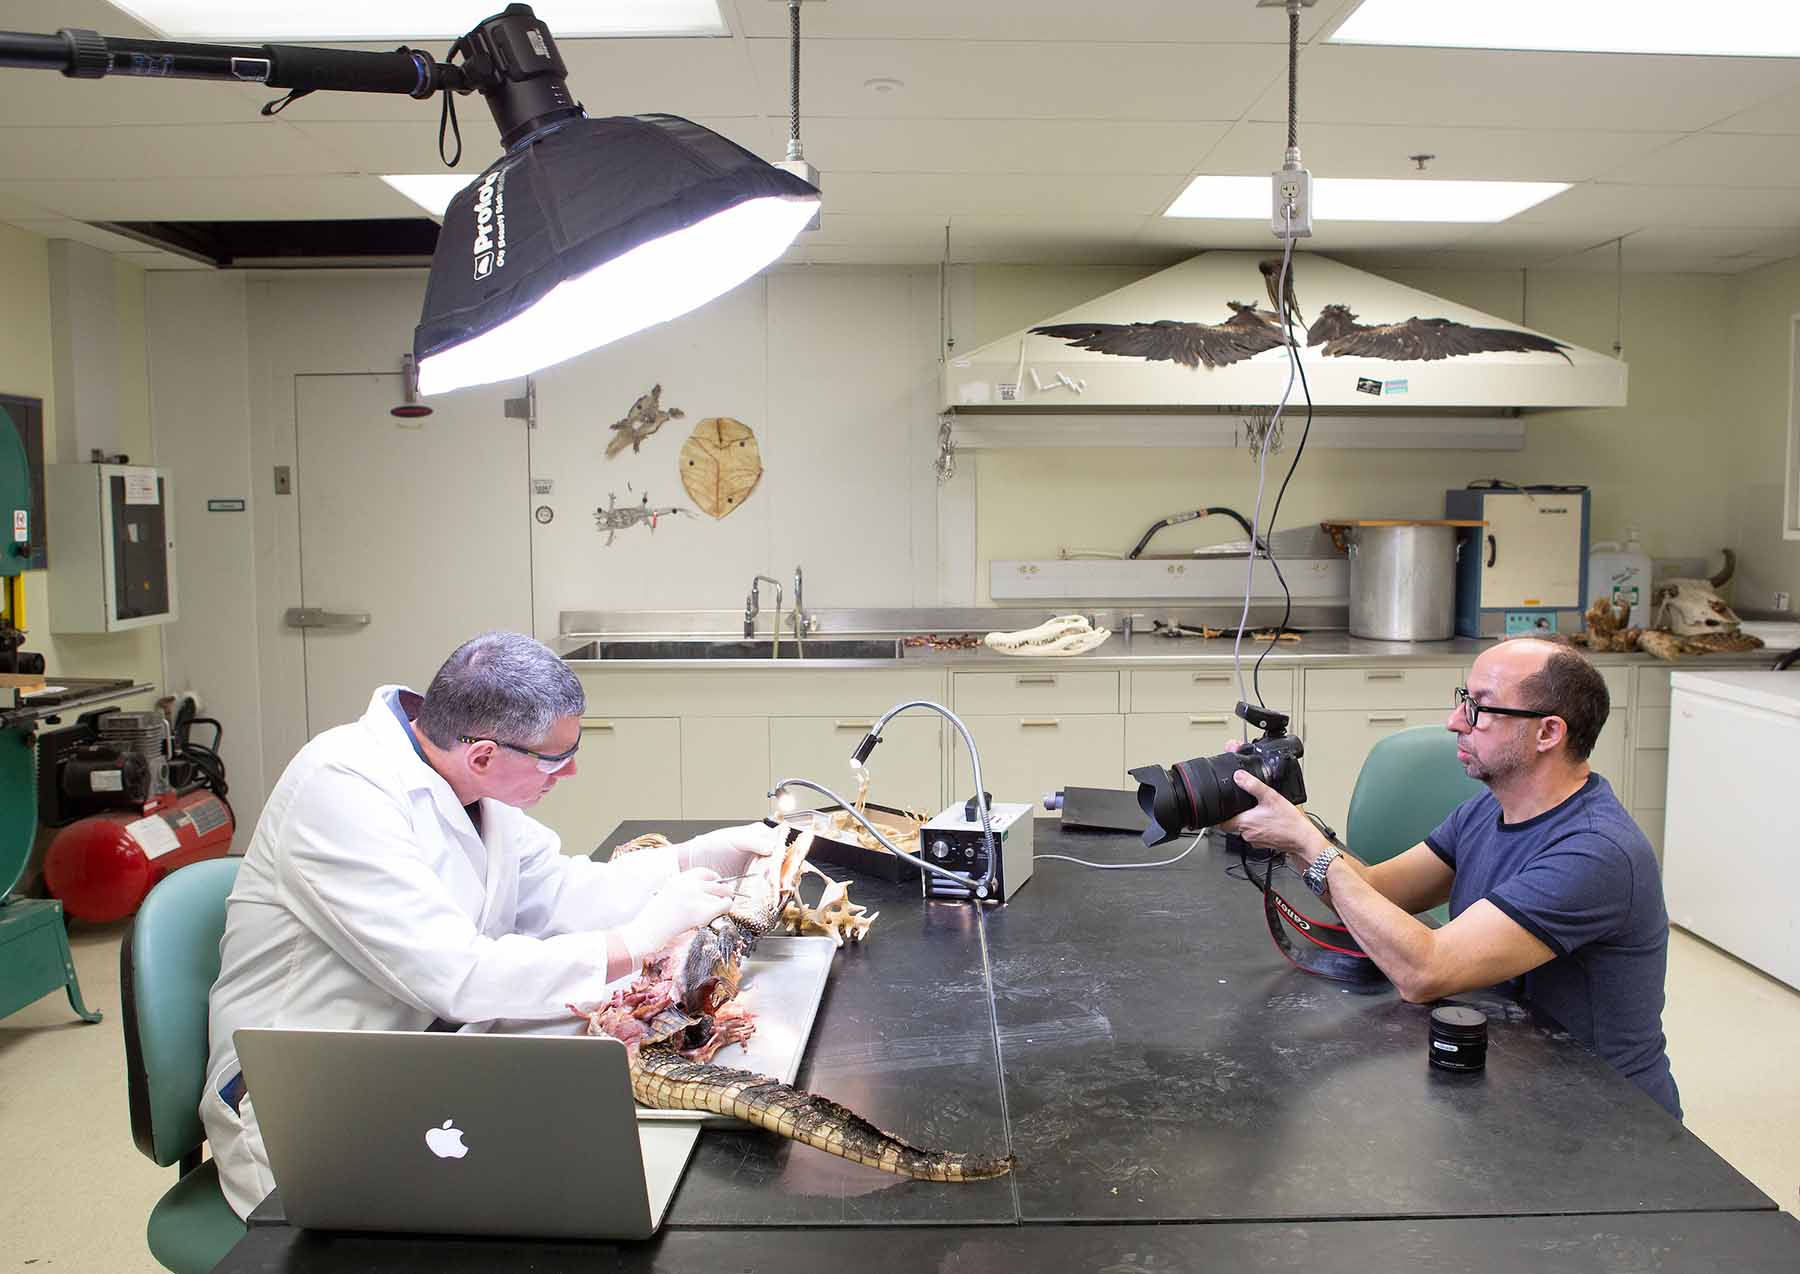 Dr. Witmer is photographed dissecting a crocodile specimen